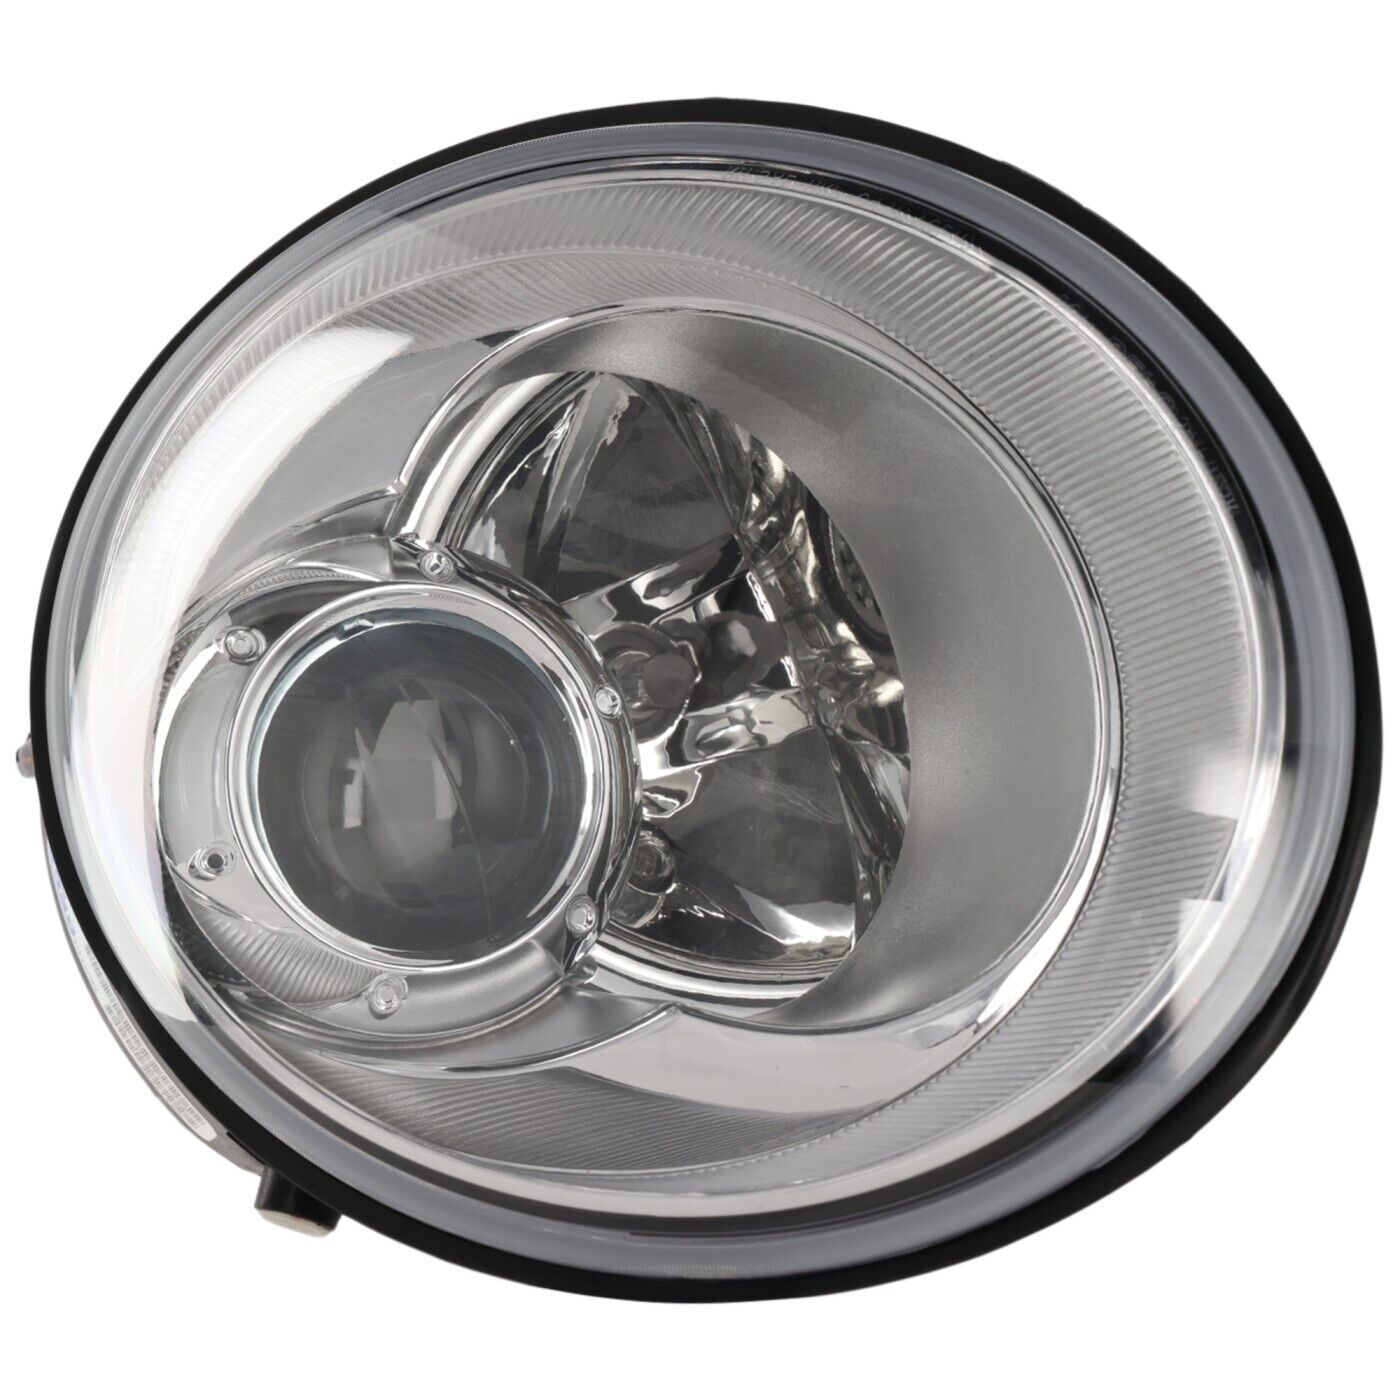 Headlight For 2006-2010 Volkswagen Beetle with Bulb Driver Side 1C0941029N